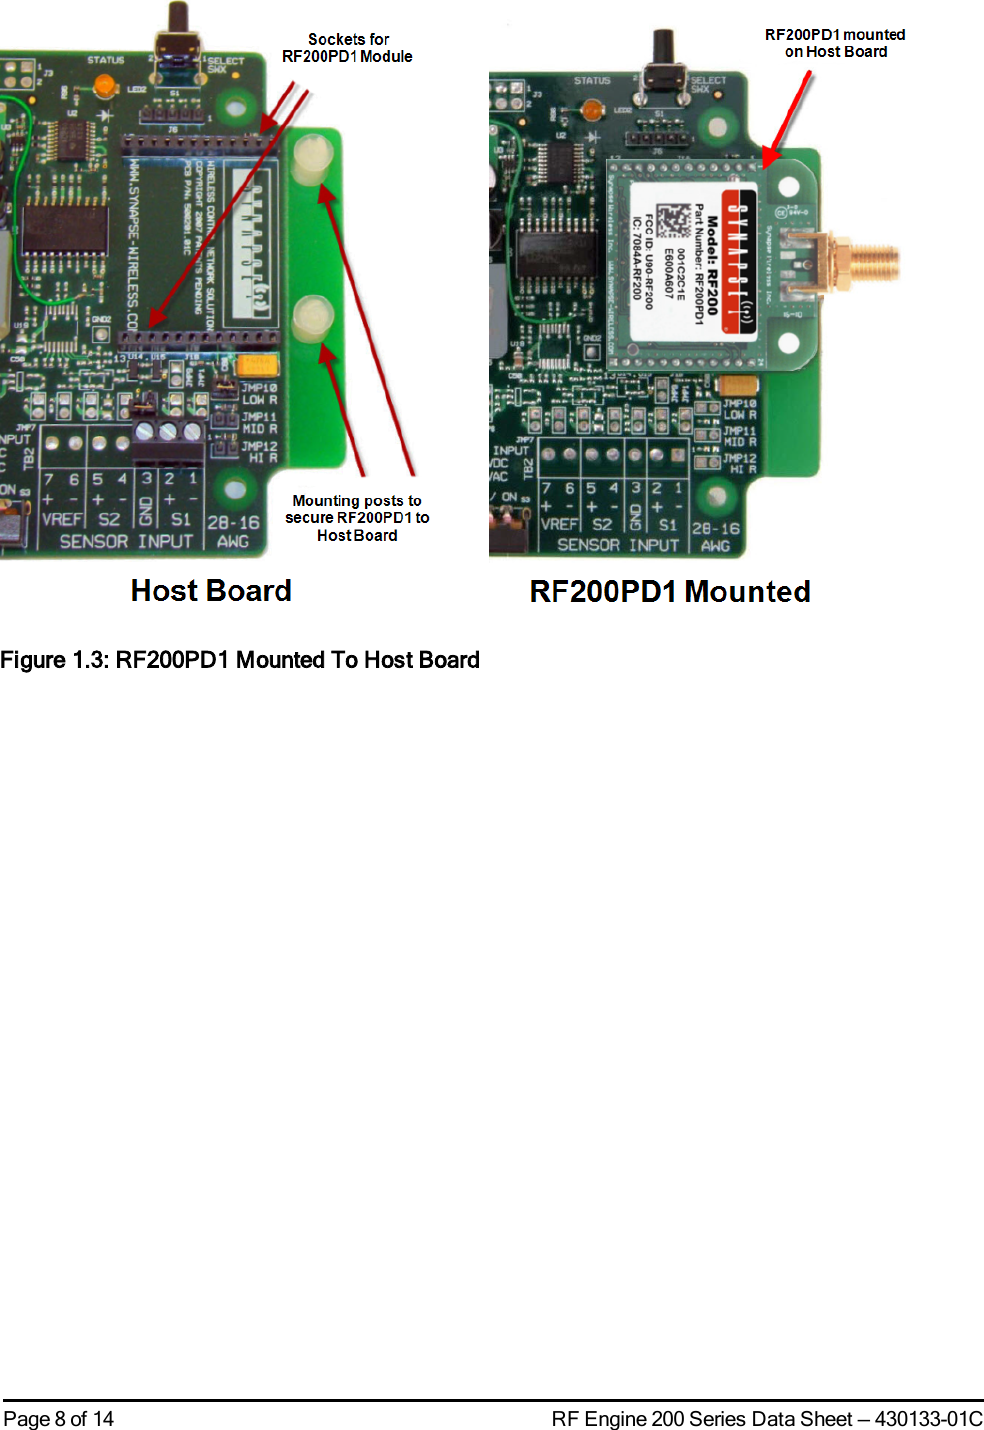 Page 8 of 14 RF Engine 200 Series Data Sheet — 430133-01CFigure 1.3: RF200PD1 Mounted To Host Board